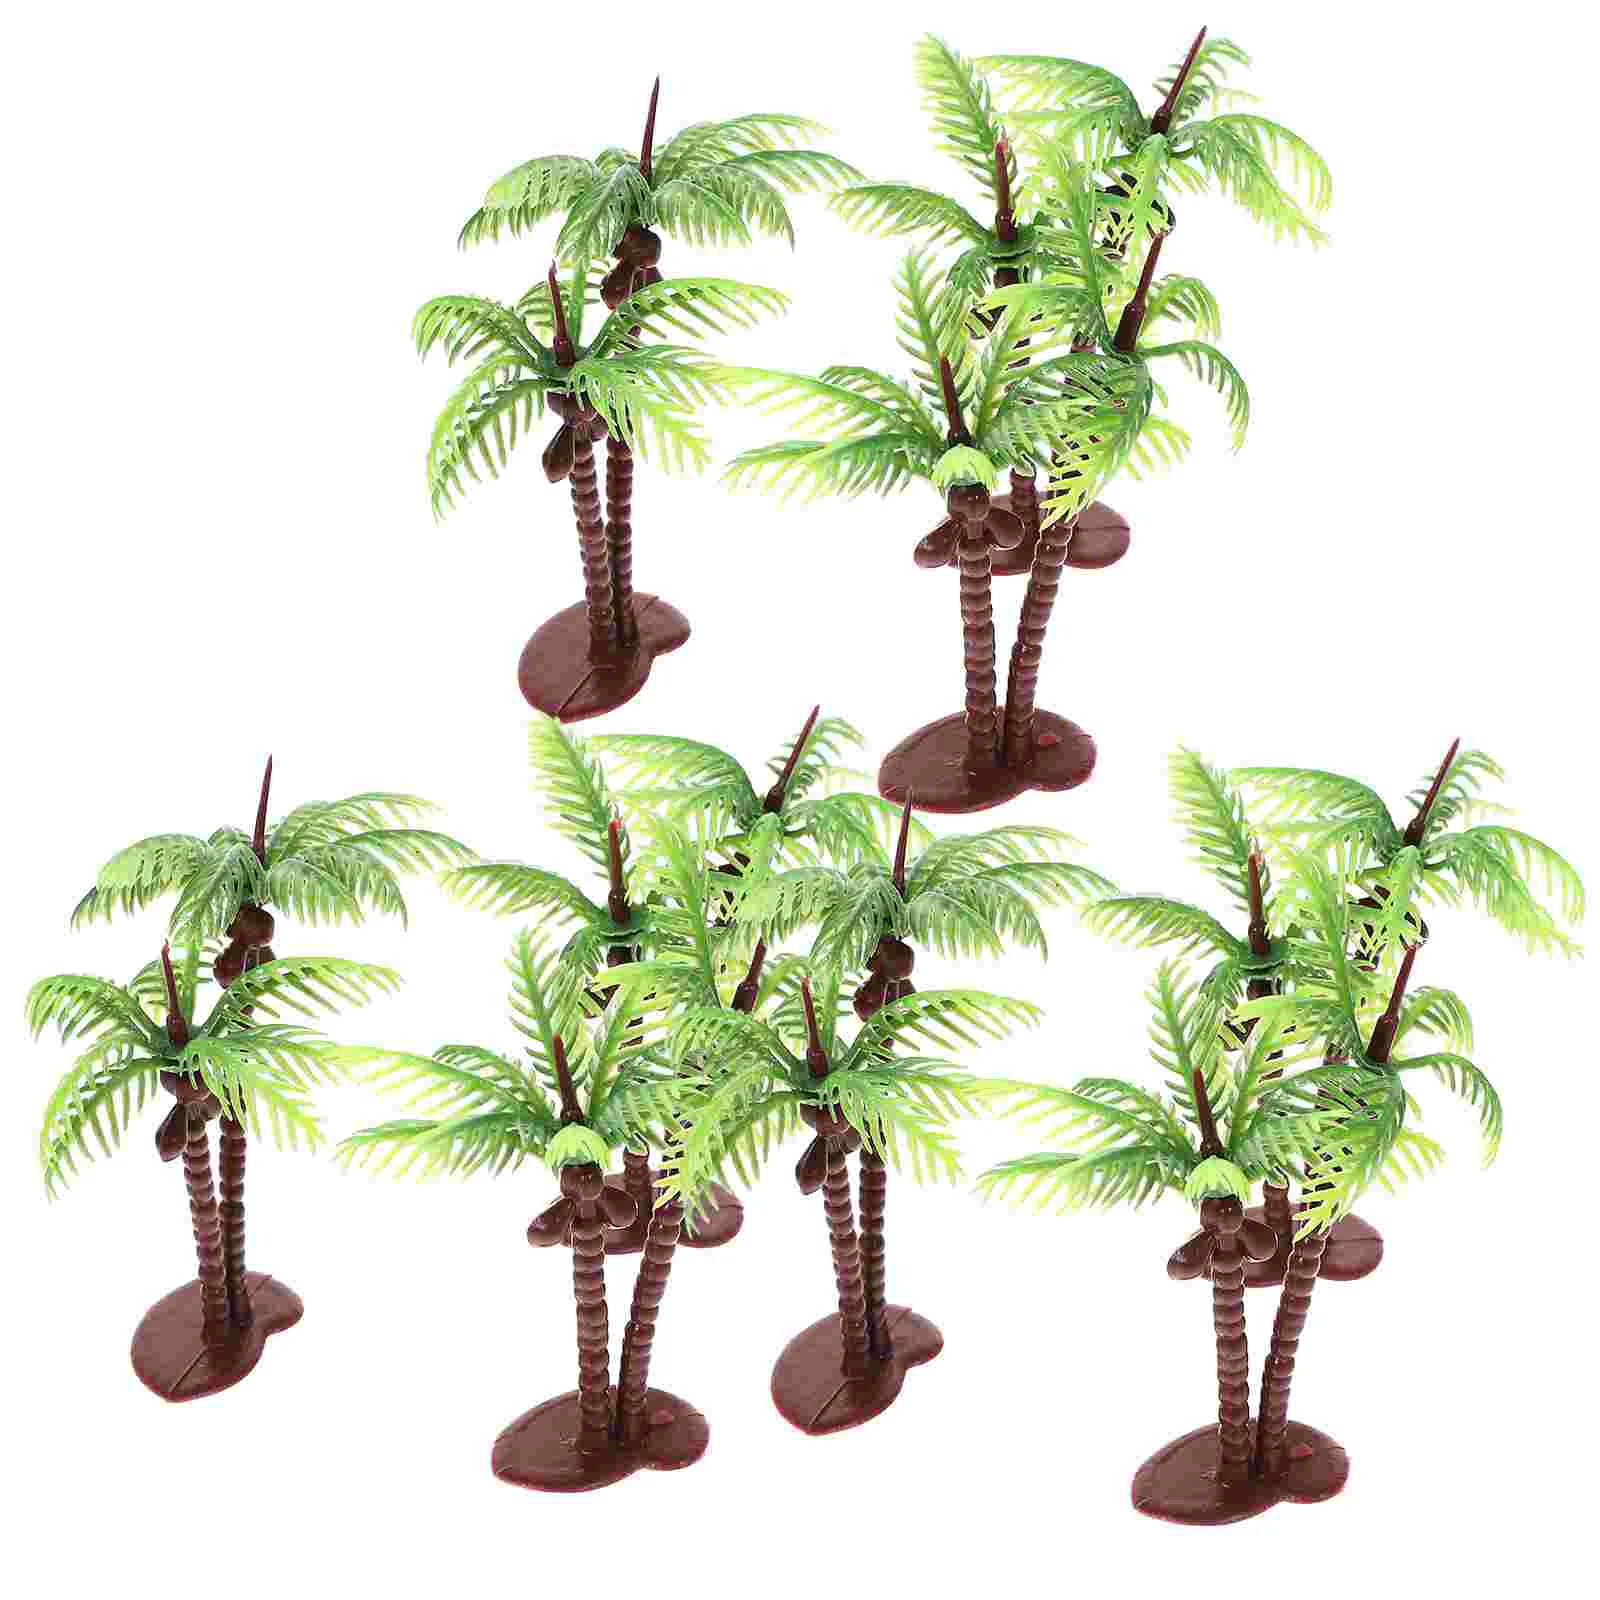 

Model Adornment Miniature Fake Tree Trees For Crafts Simulation Sand Table